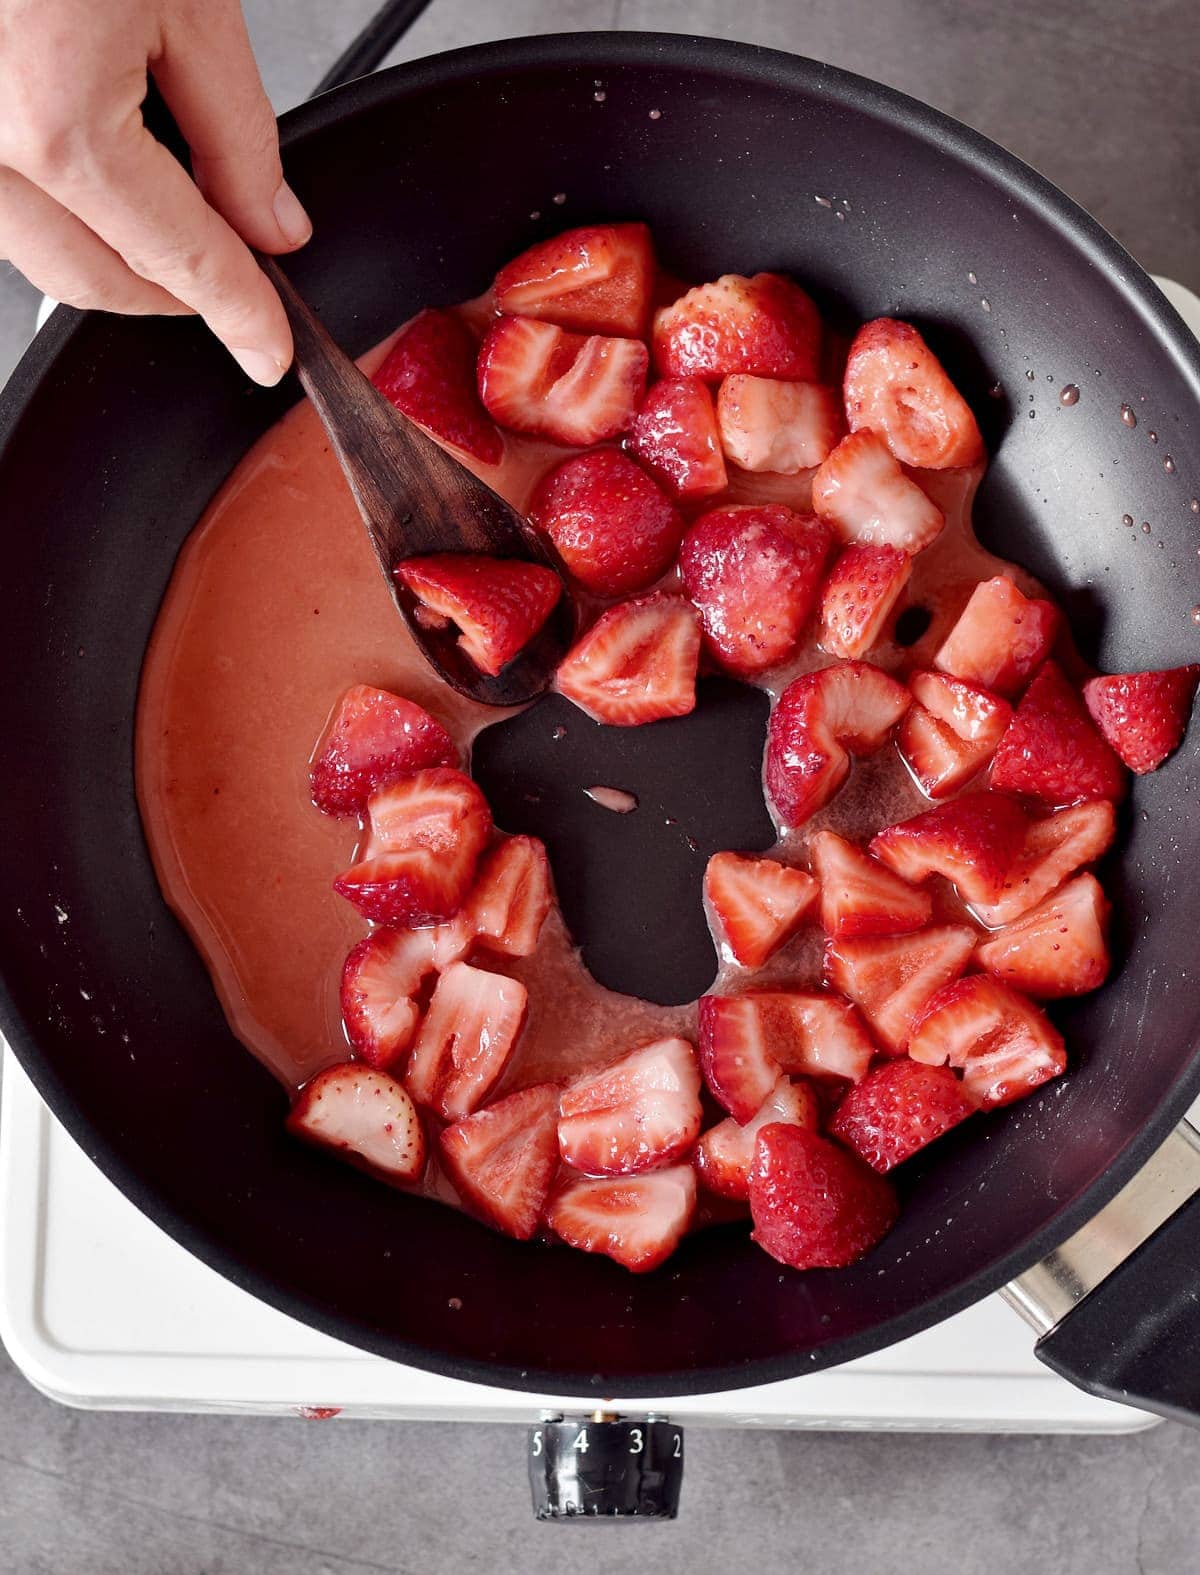 stirring small pieces of strawberries in a black pan